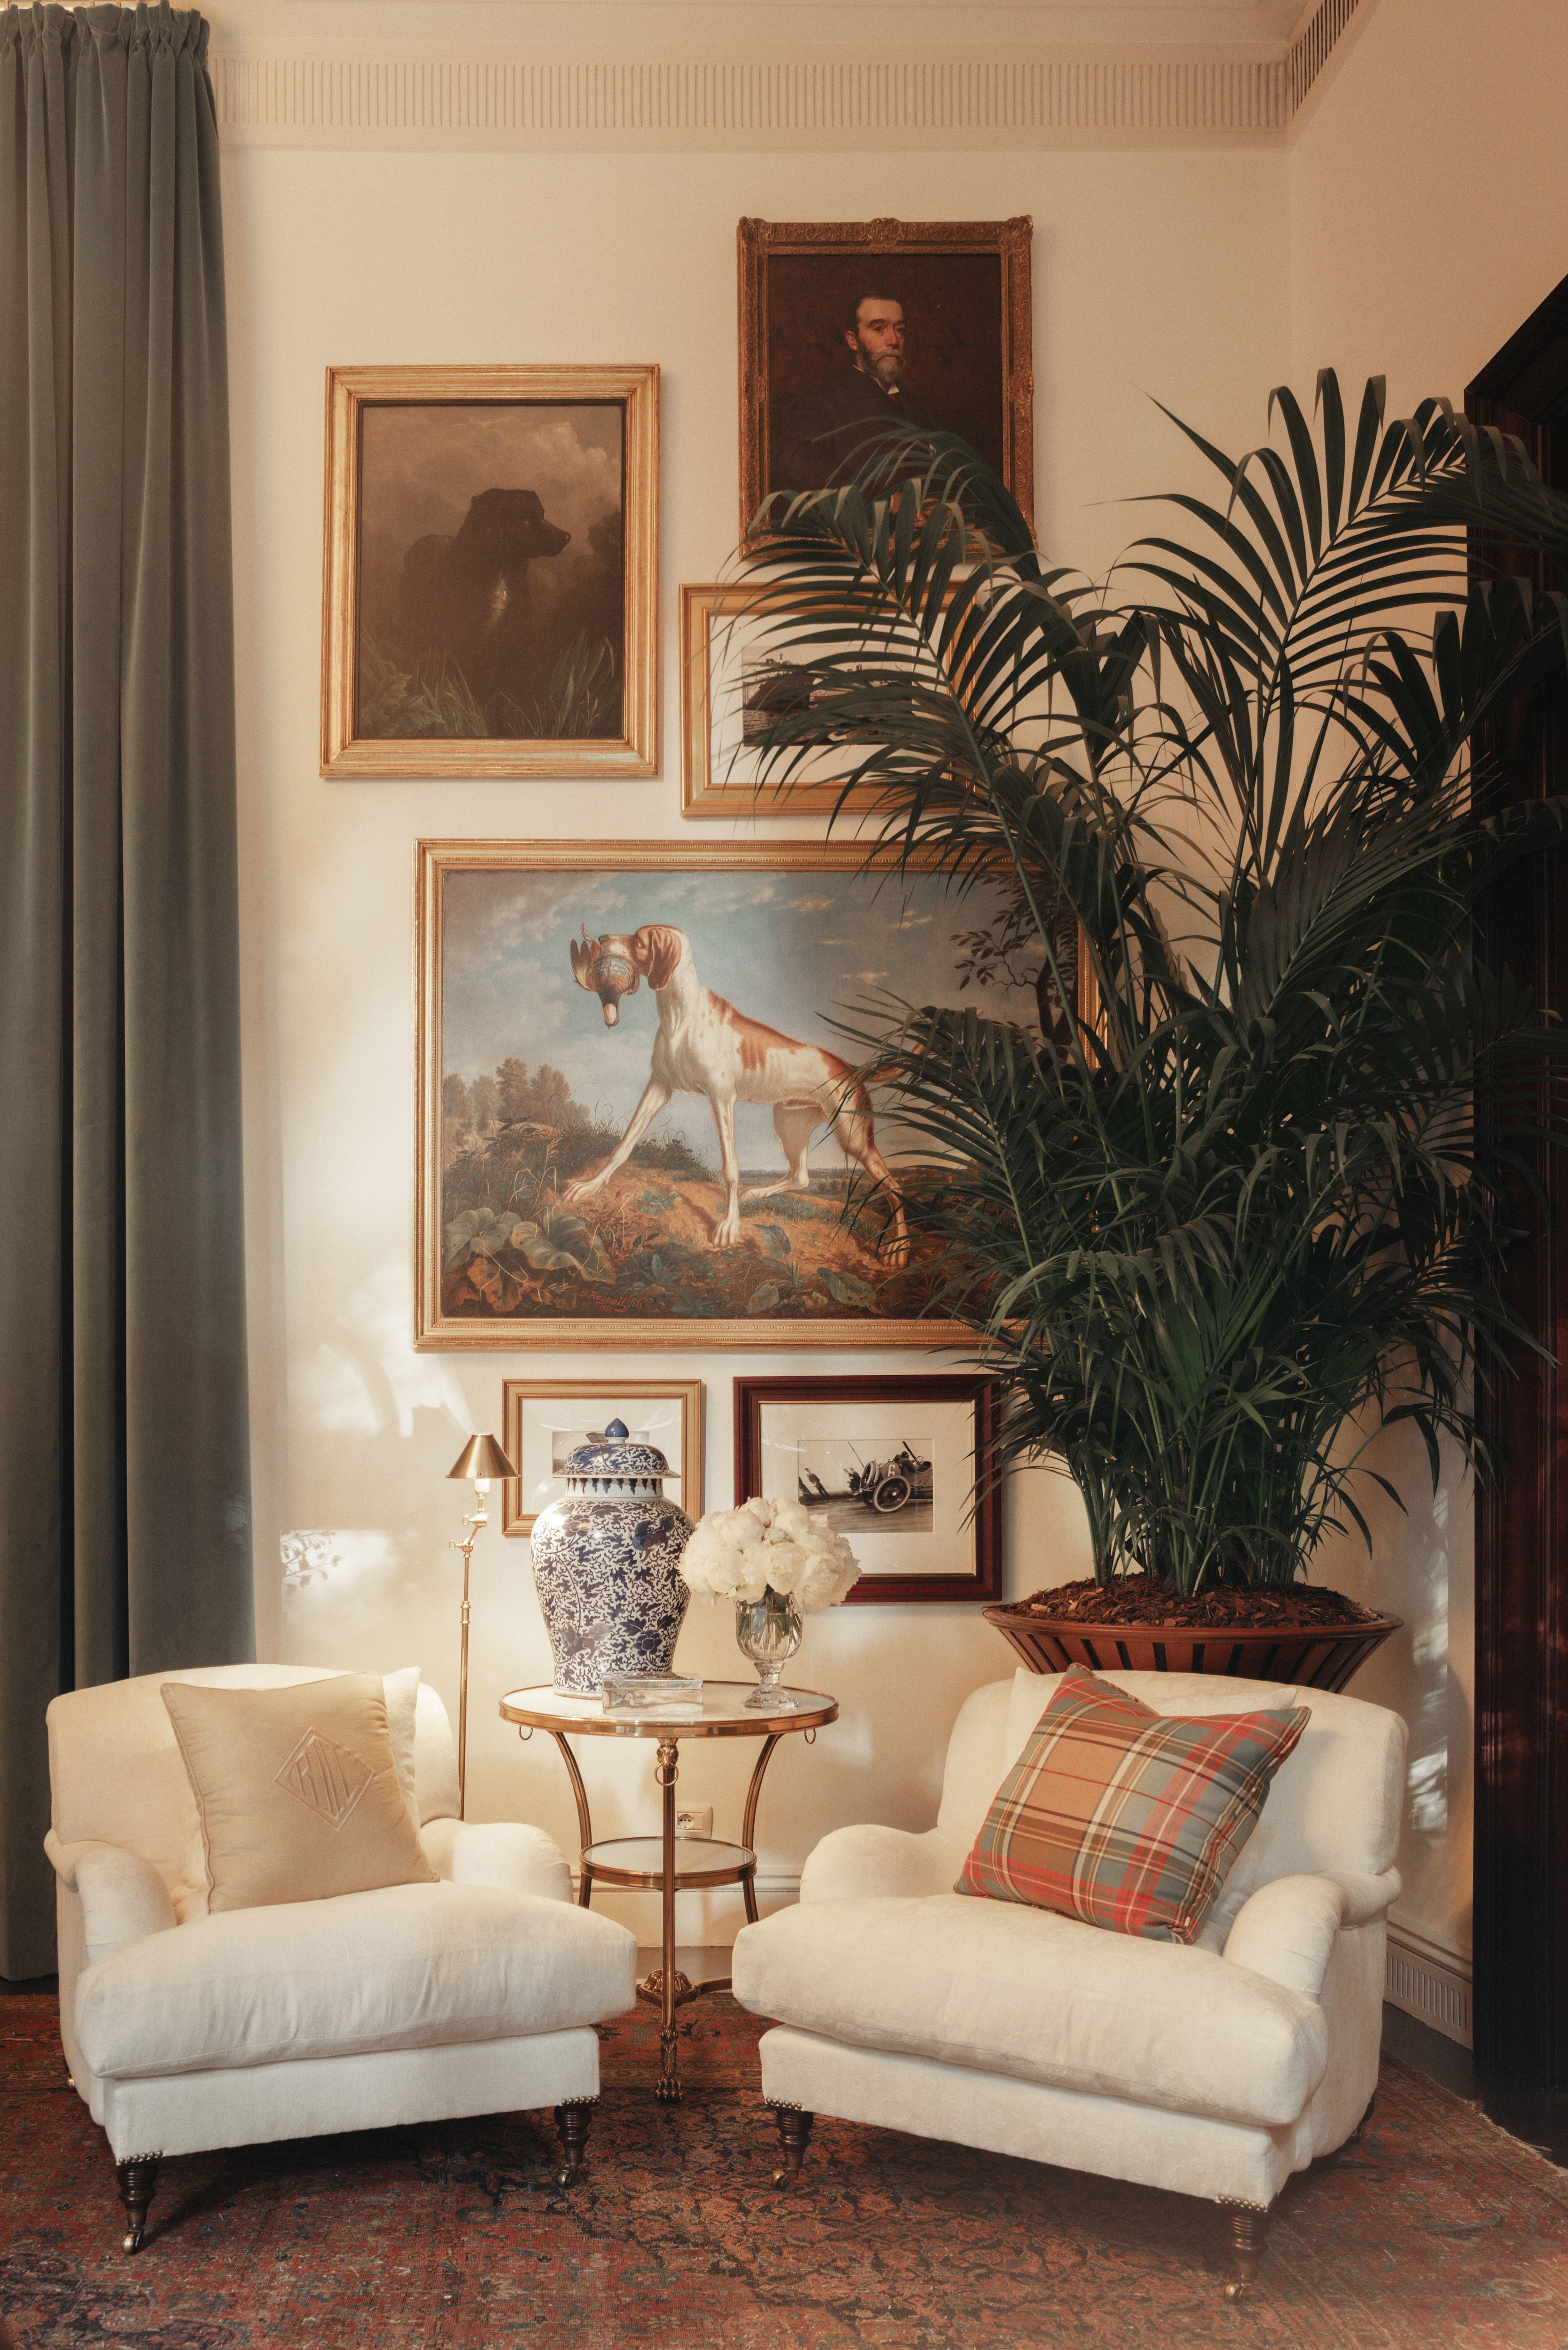 Ralph Lauren's Cinematic Vision is Brought to Life with Ralph's Milan: An  Invitation Only Destination Celebrating American Lifestyle and Timeless  Design